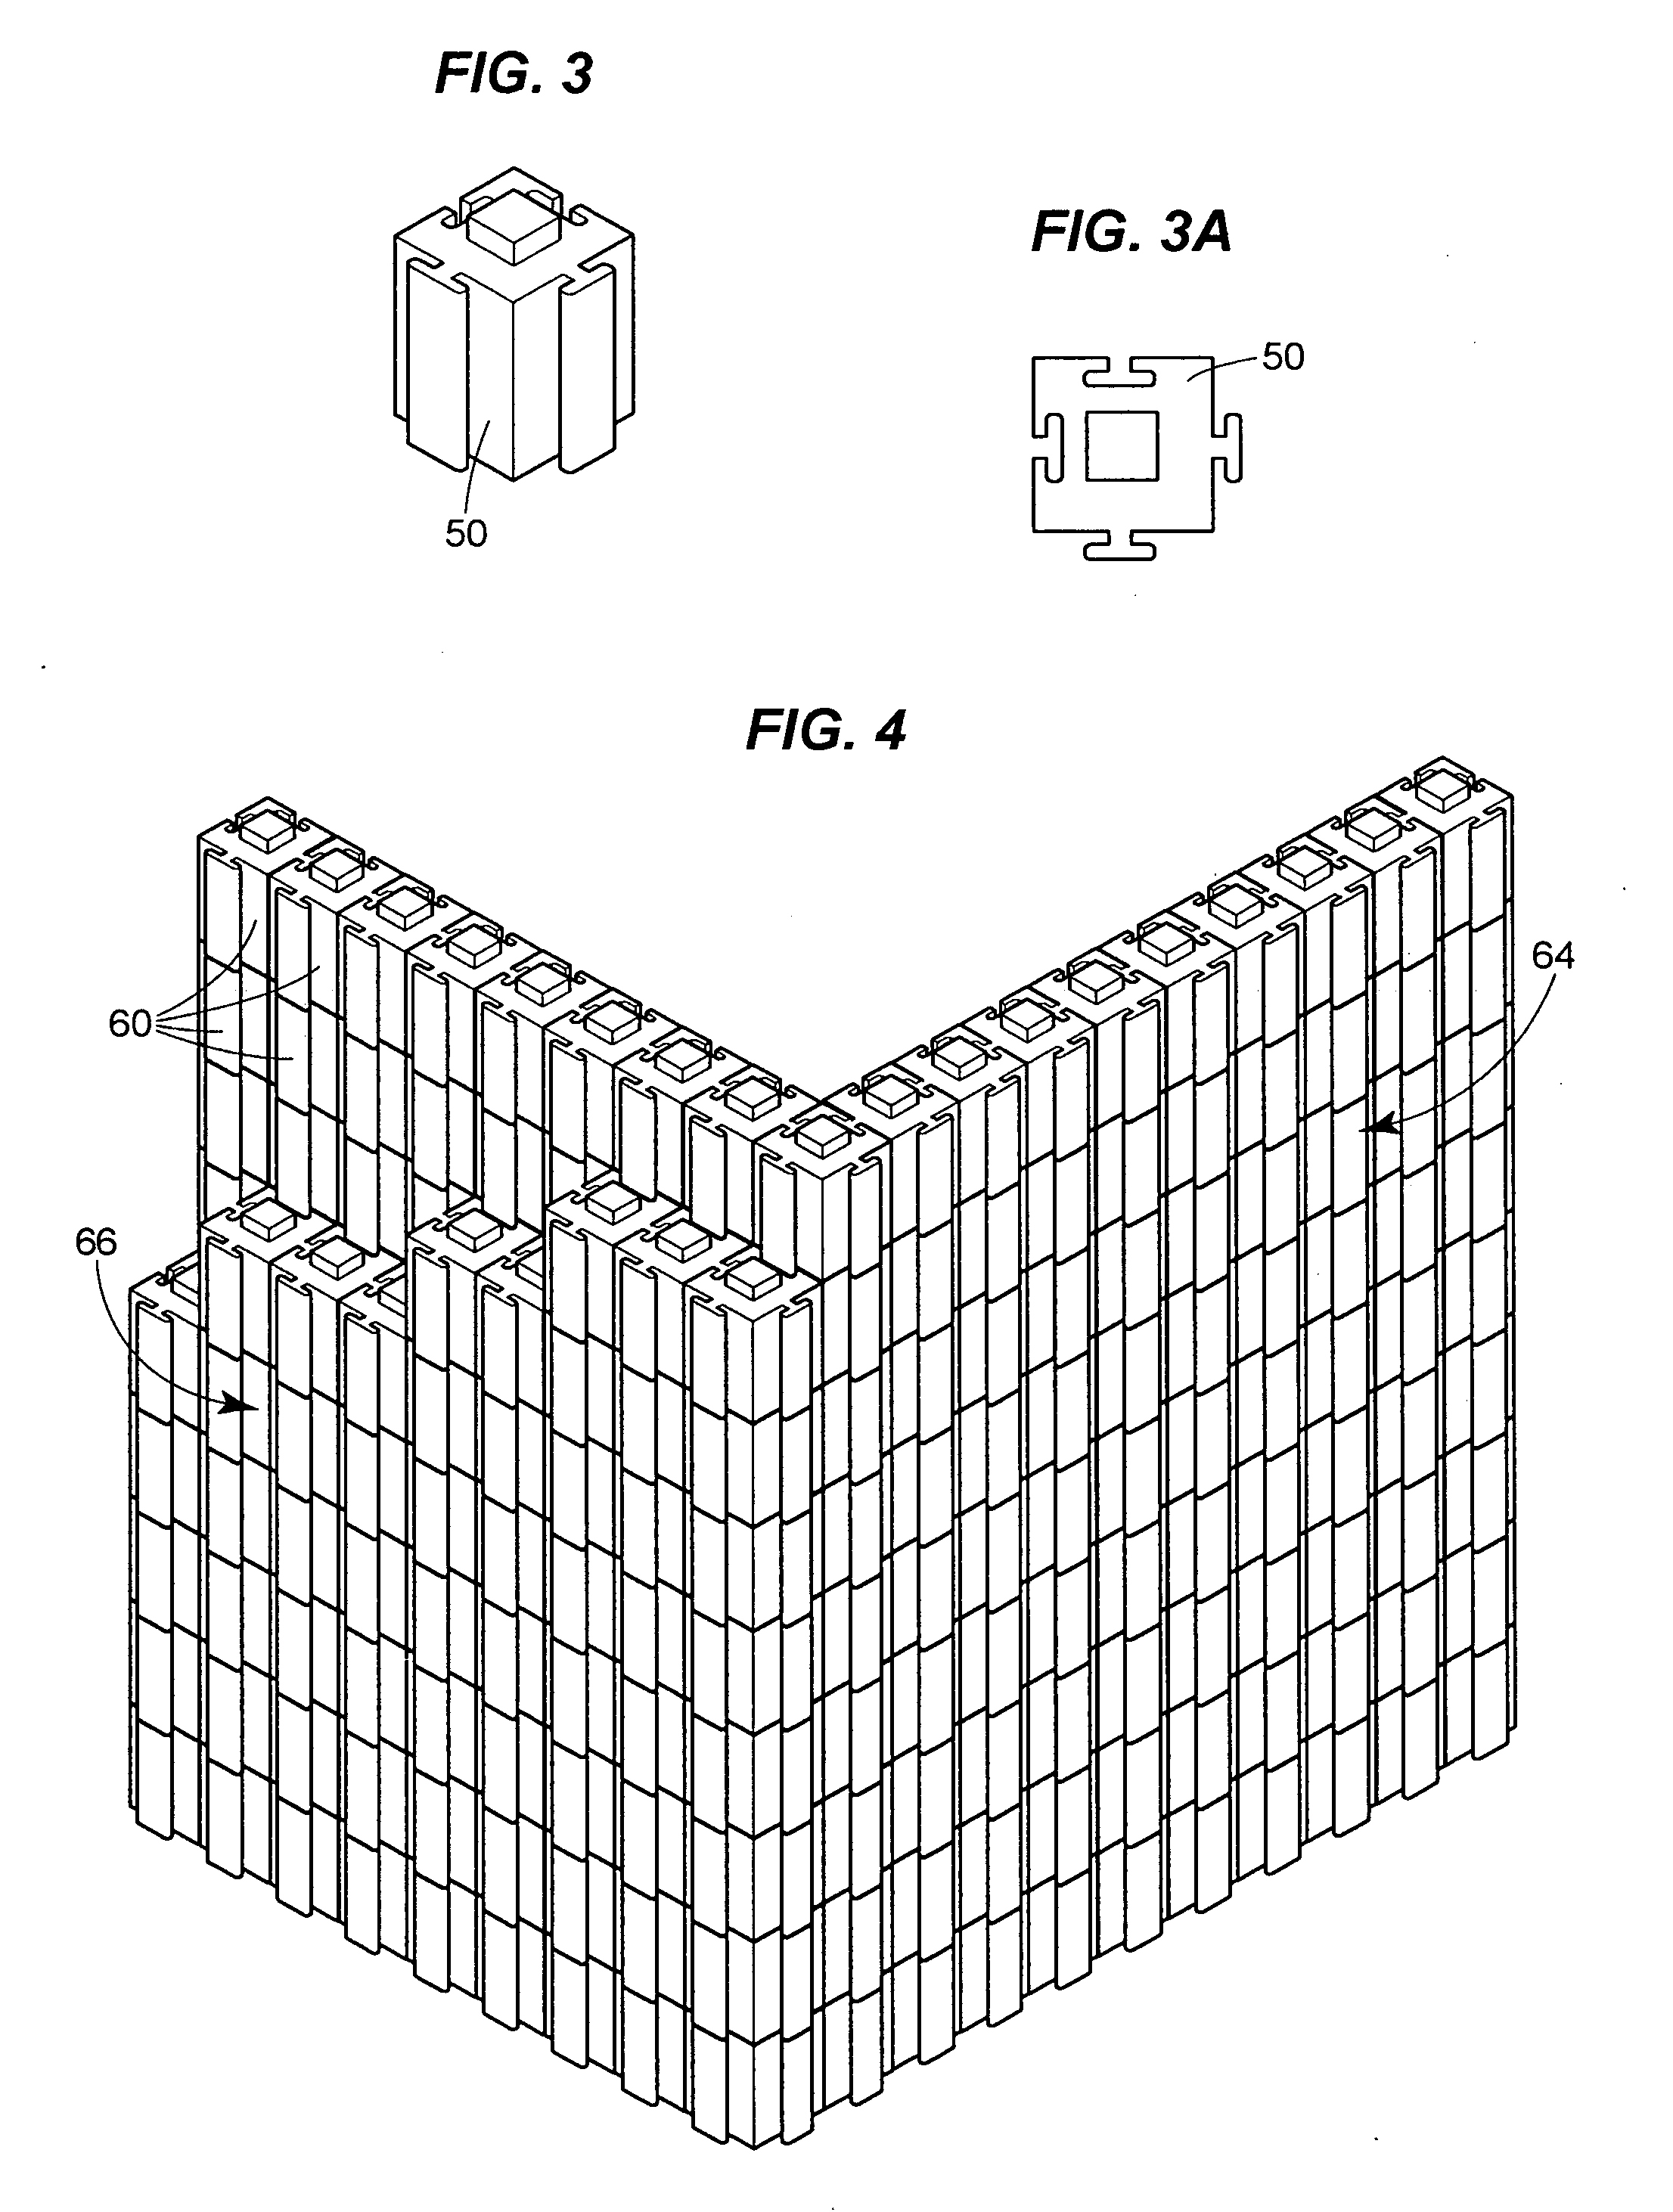 Basalt particle-containing compositions and articles for protective coatings and ballistic shield mats/tiles/protective building components